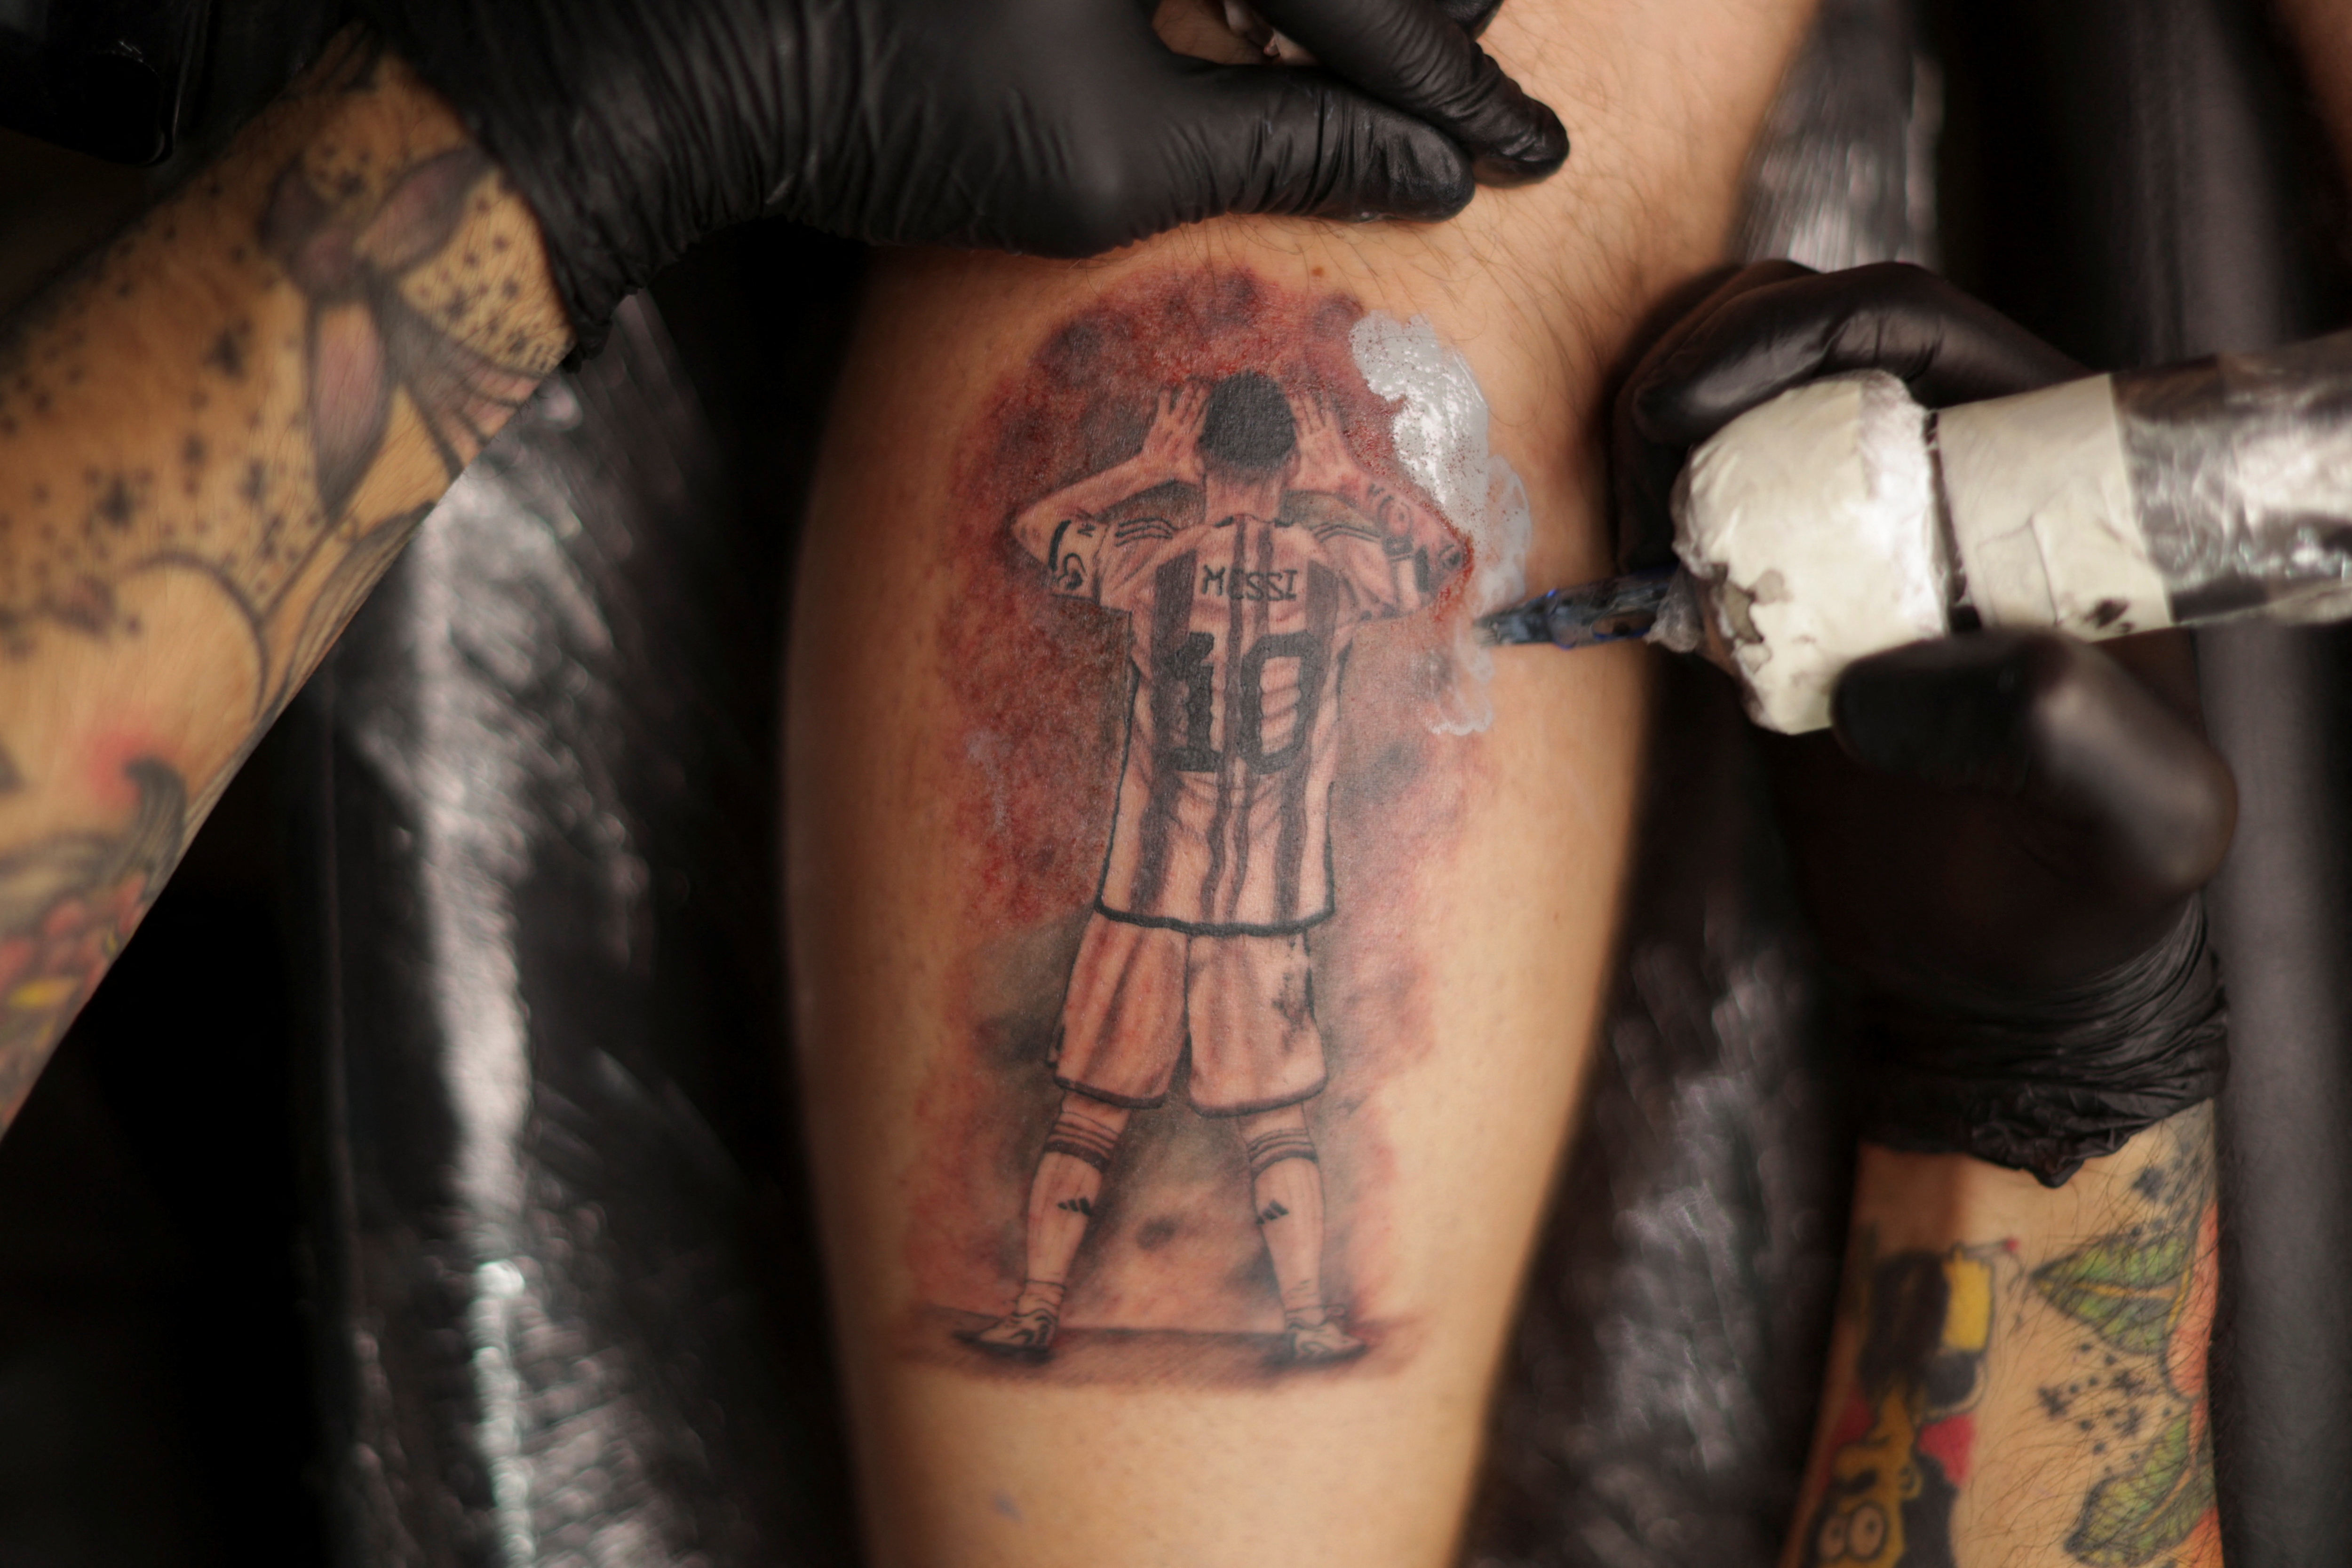 Argentine tattooists swamped by demand for Messi tributes | Reuters